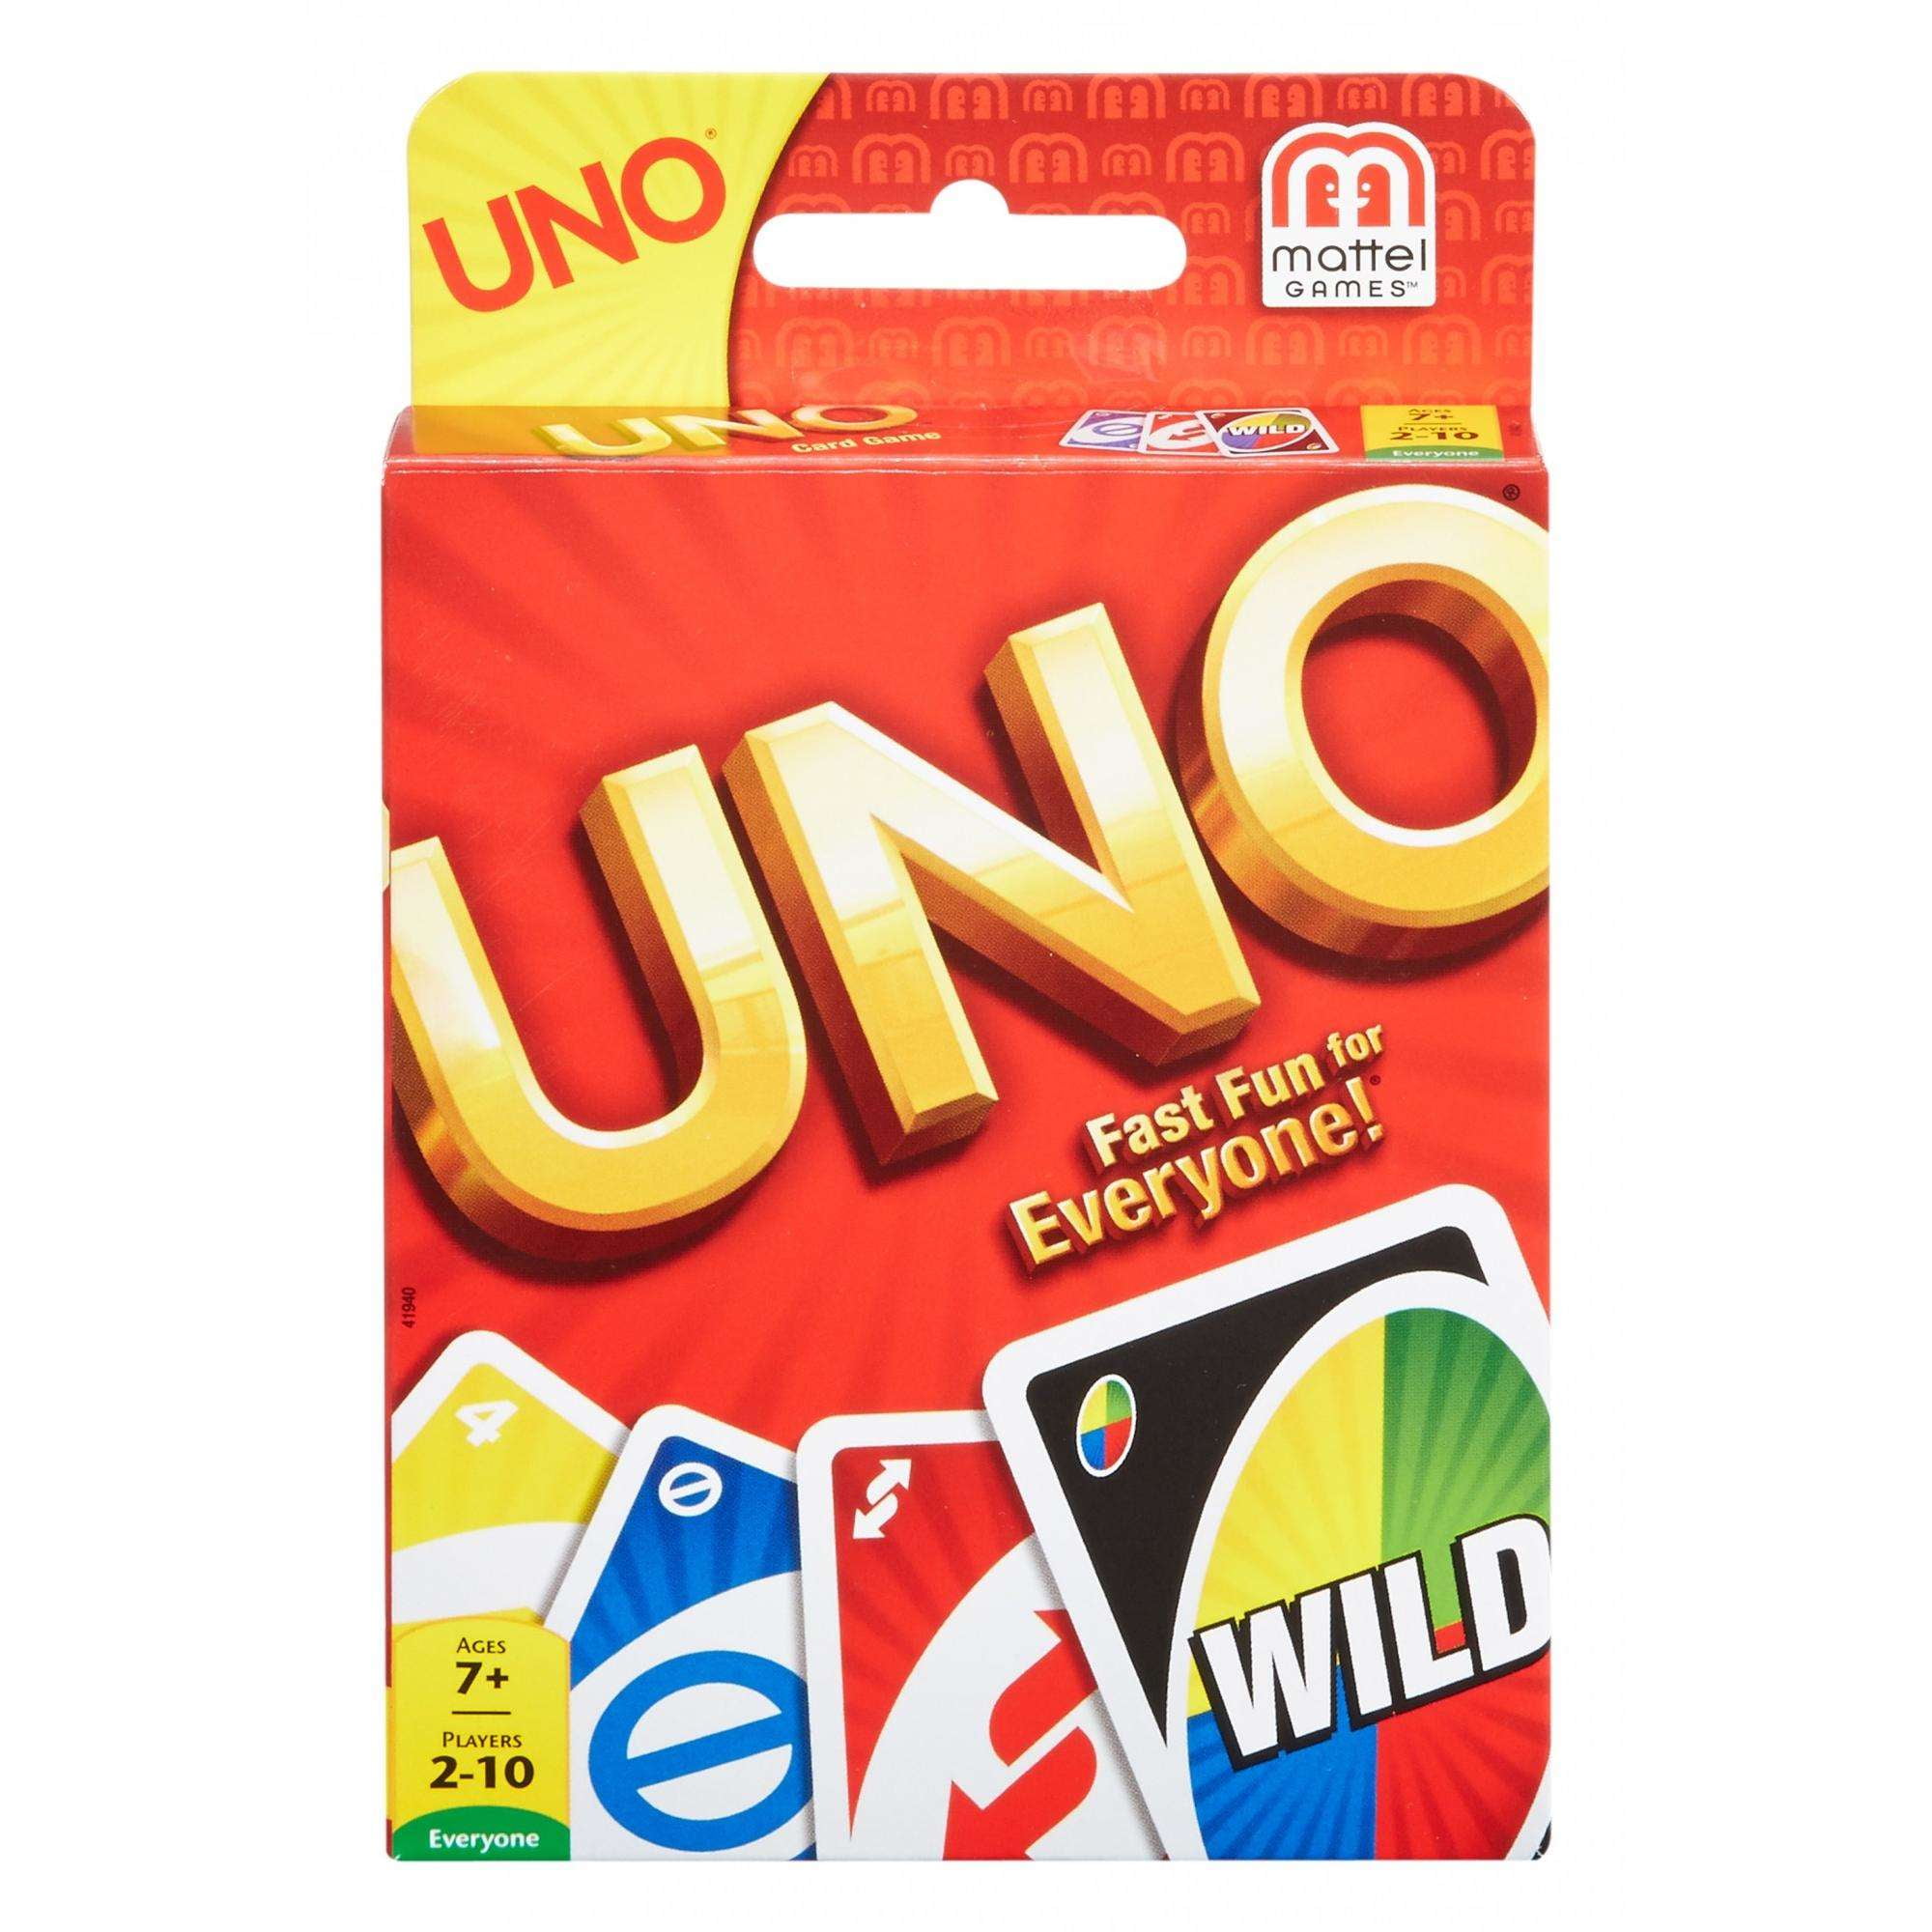 Mattel Games UNO Showdown Family Friendly Card Game 2-10 Players Ages 7 Years for sale online 